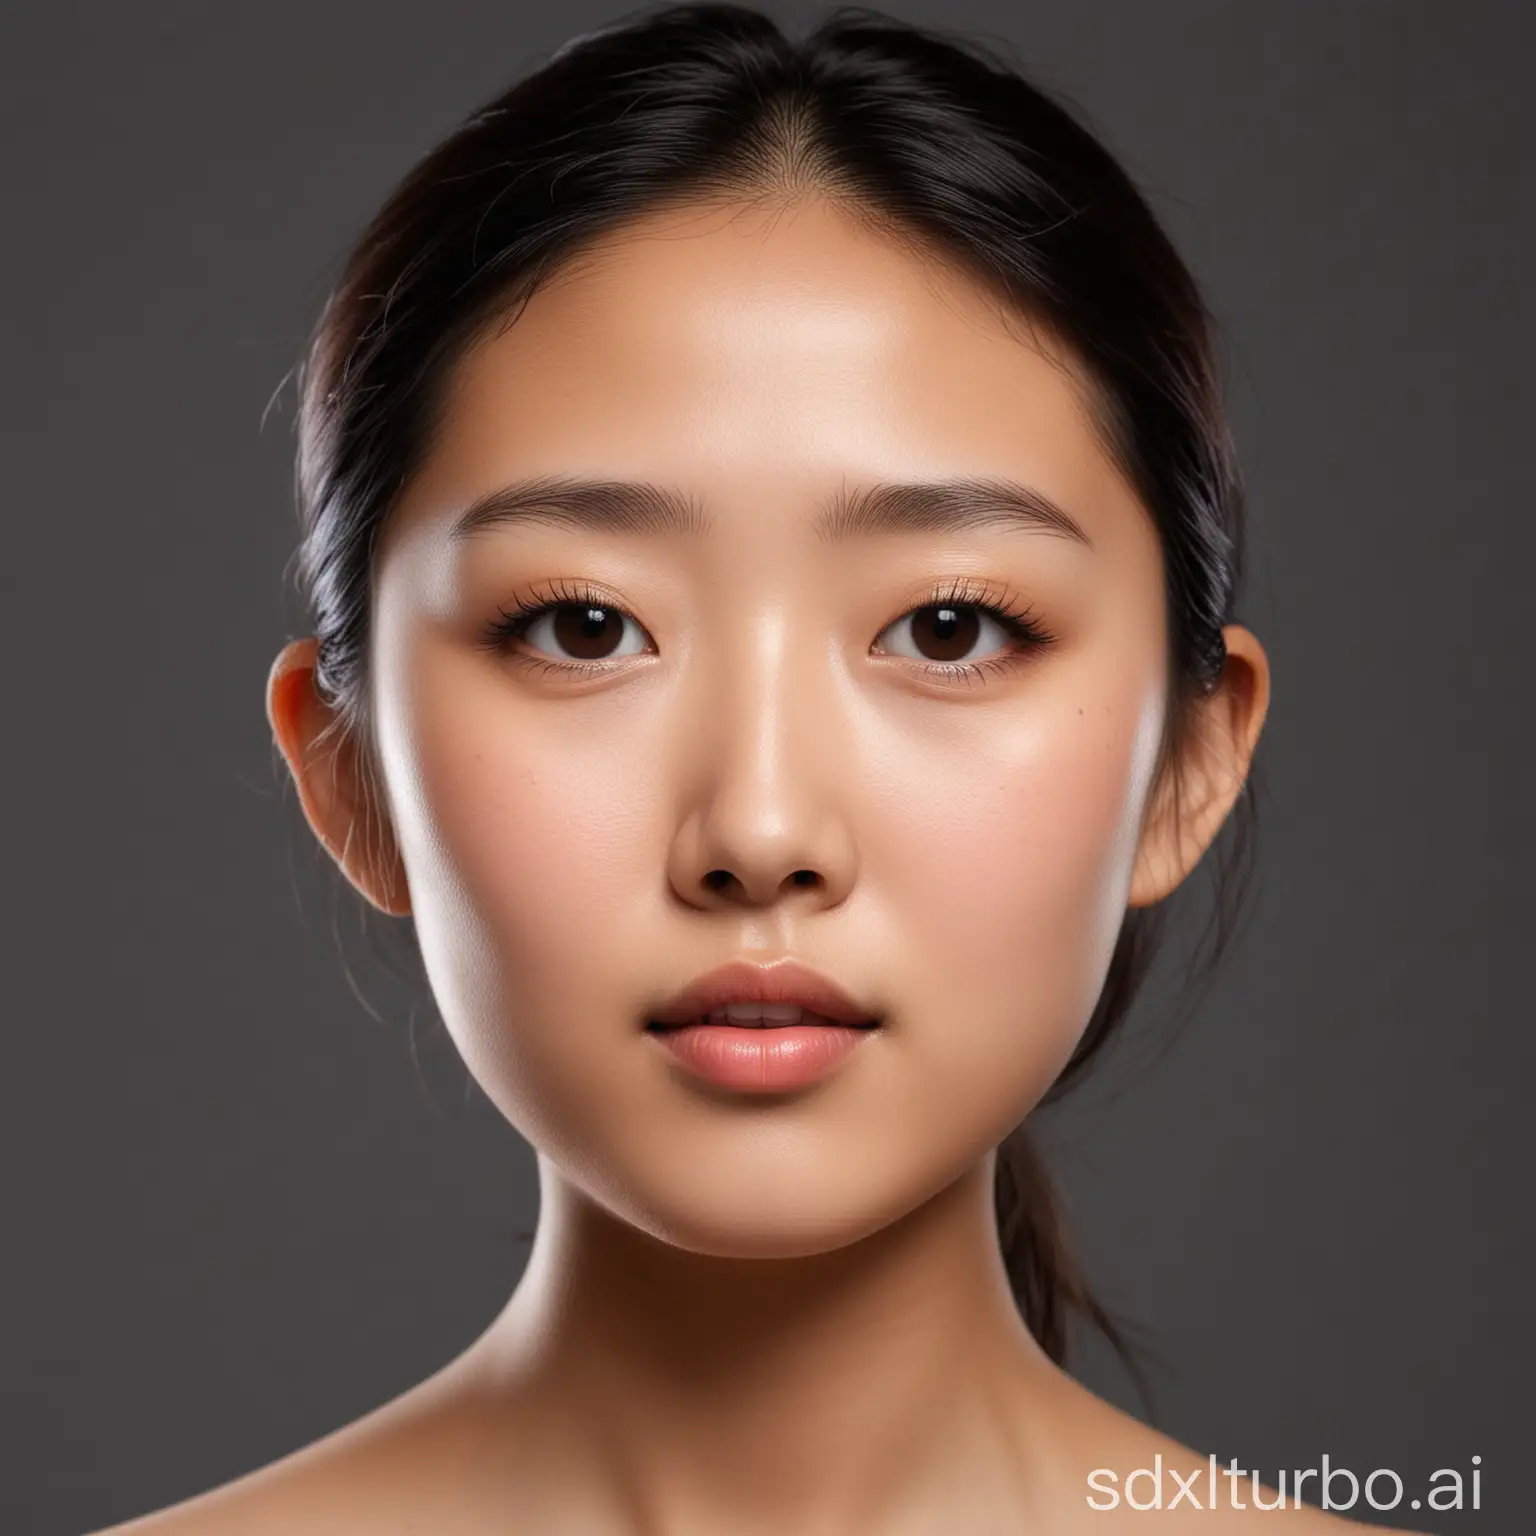 Asian-Girls-Face-with-Ellipse-Shape-and-FrontUpper-Lighting